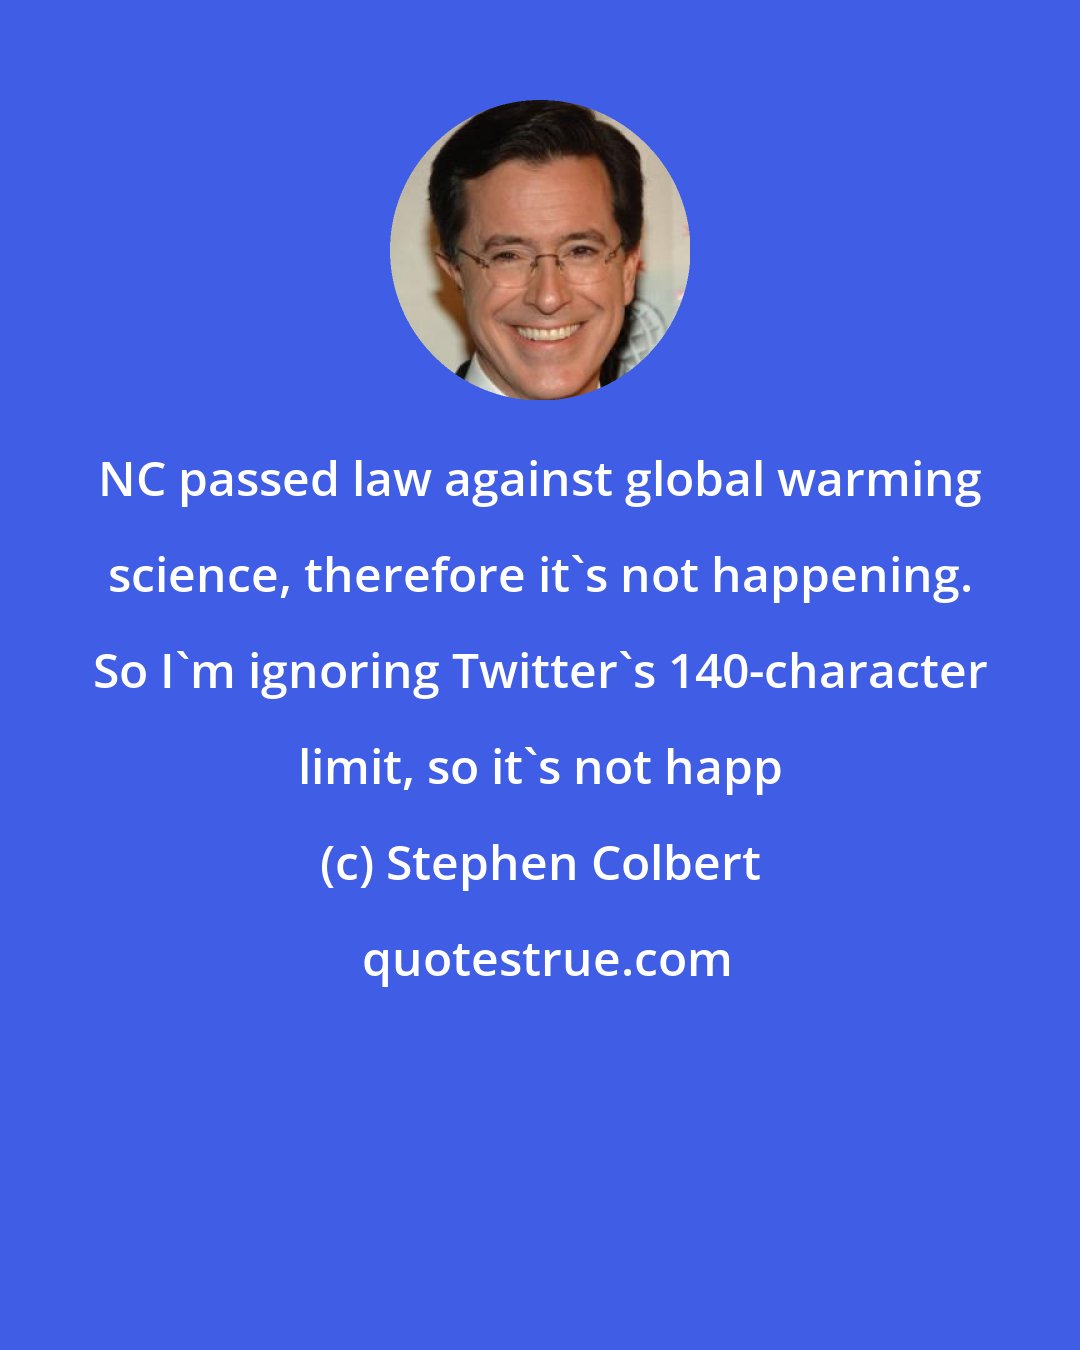 Stephen Colbert: NC passed law against global warming science, therefore it's not happening. So I'm ignoring Twitter's 140-character limit, so it's not happ